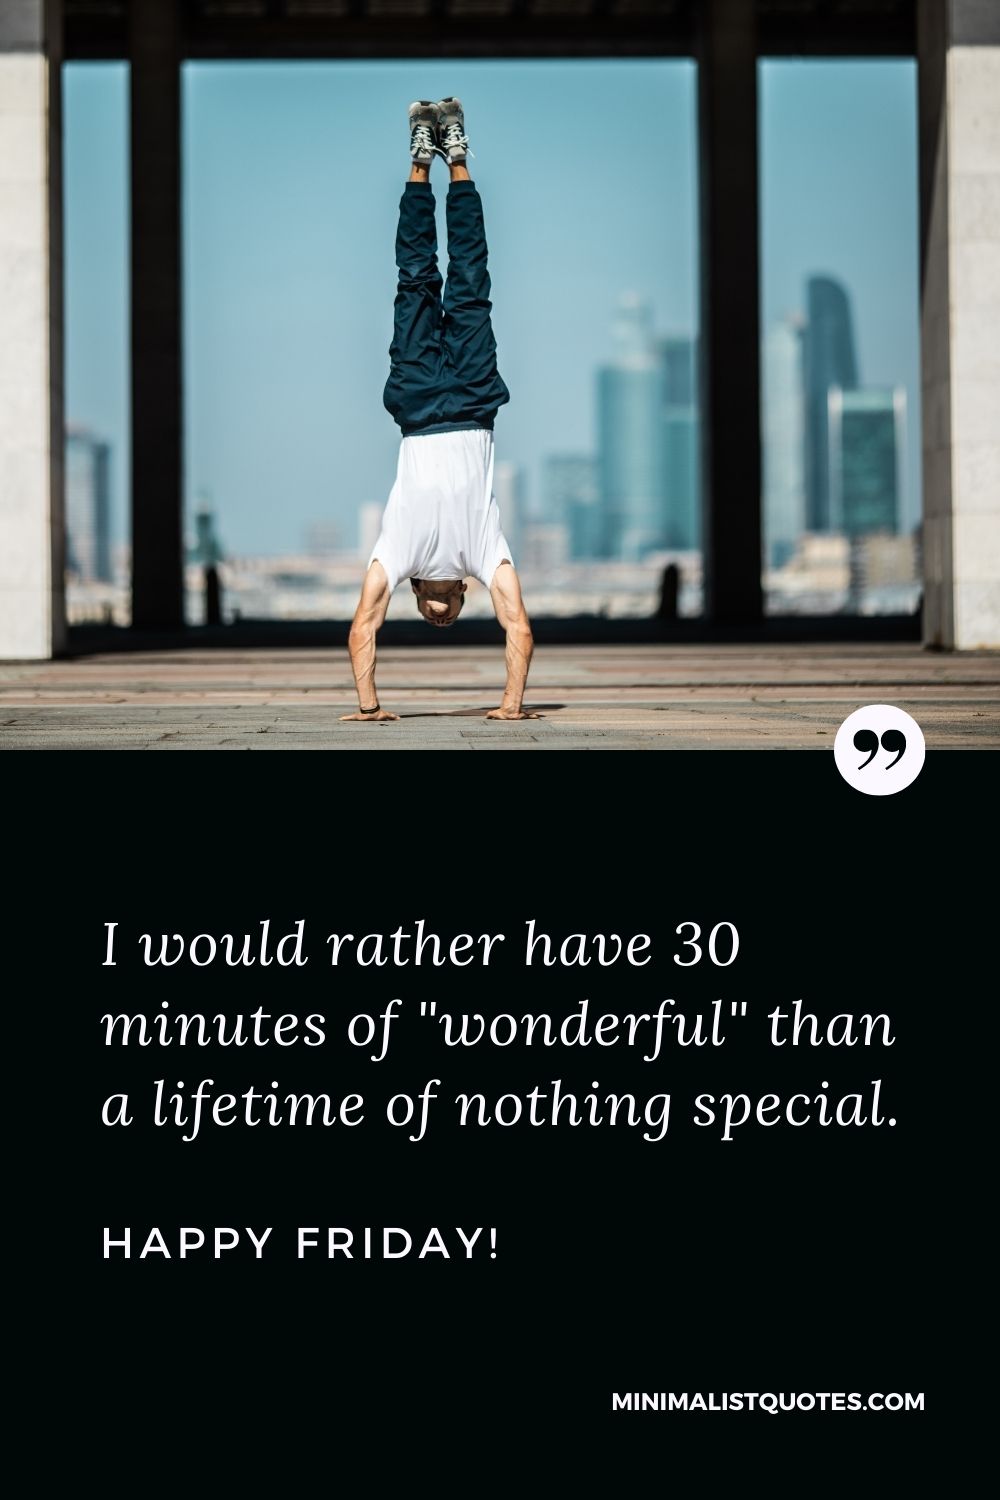 Friday Quote, Wish & Message With Image: I would rather have 30 minutes of "wonderful" than a lifetime of nothing special. Happy Friday!